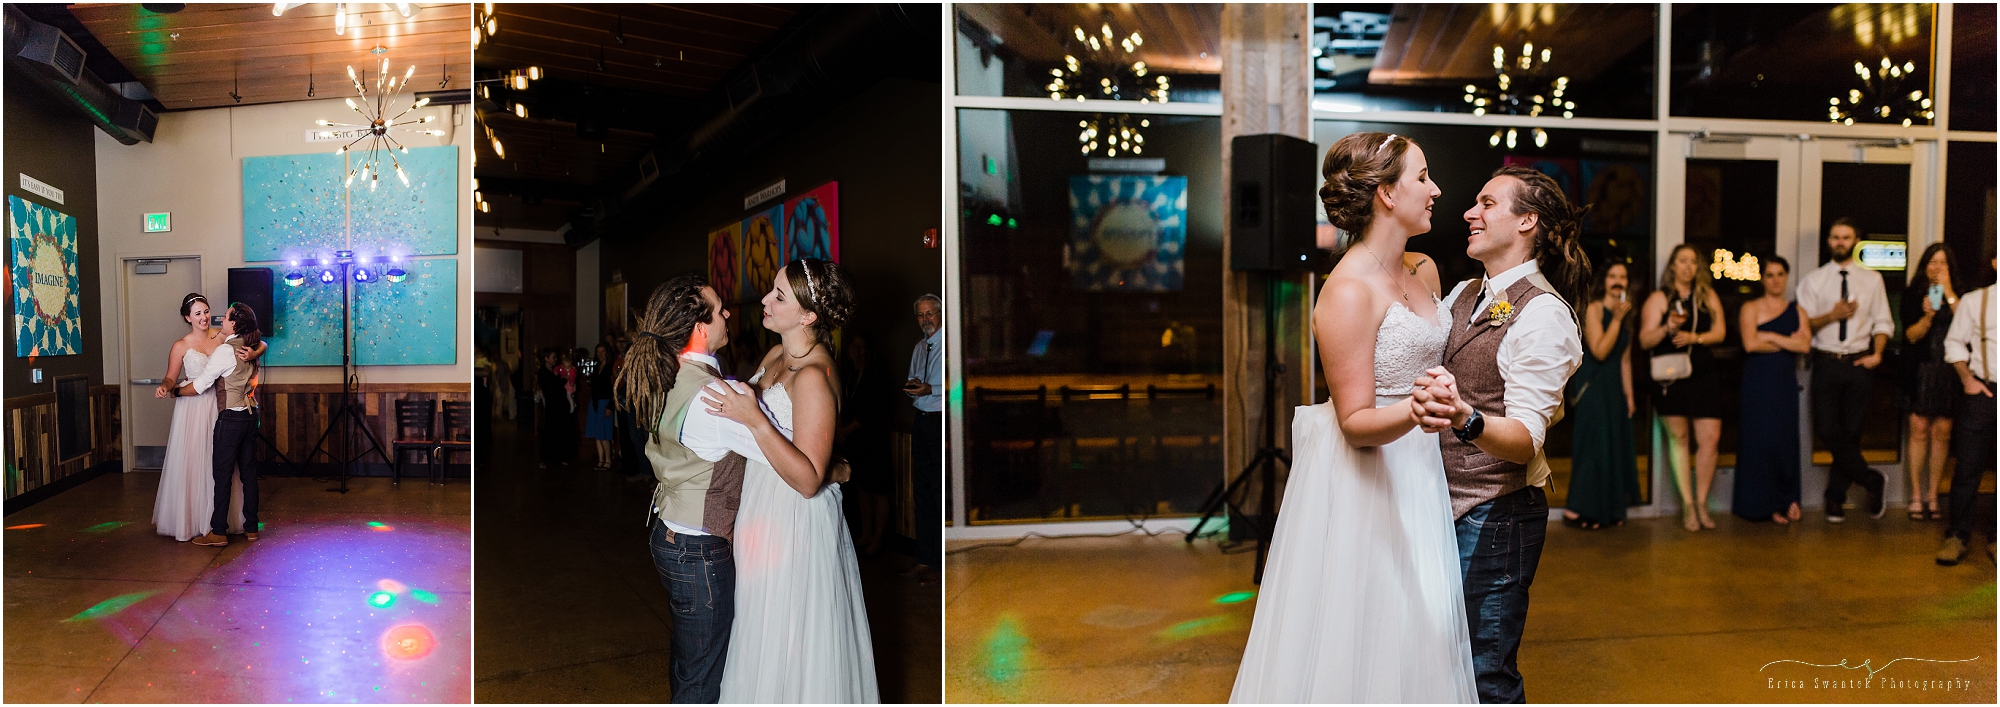 The wedding couple dances to their song played by DJ Chris Muchmore Music Production for their Worthy Brewing Wedding in Bend, Oregon. | Erica Swantek Photography